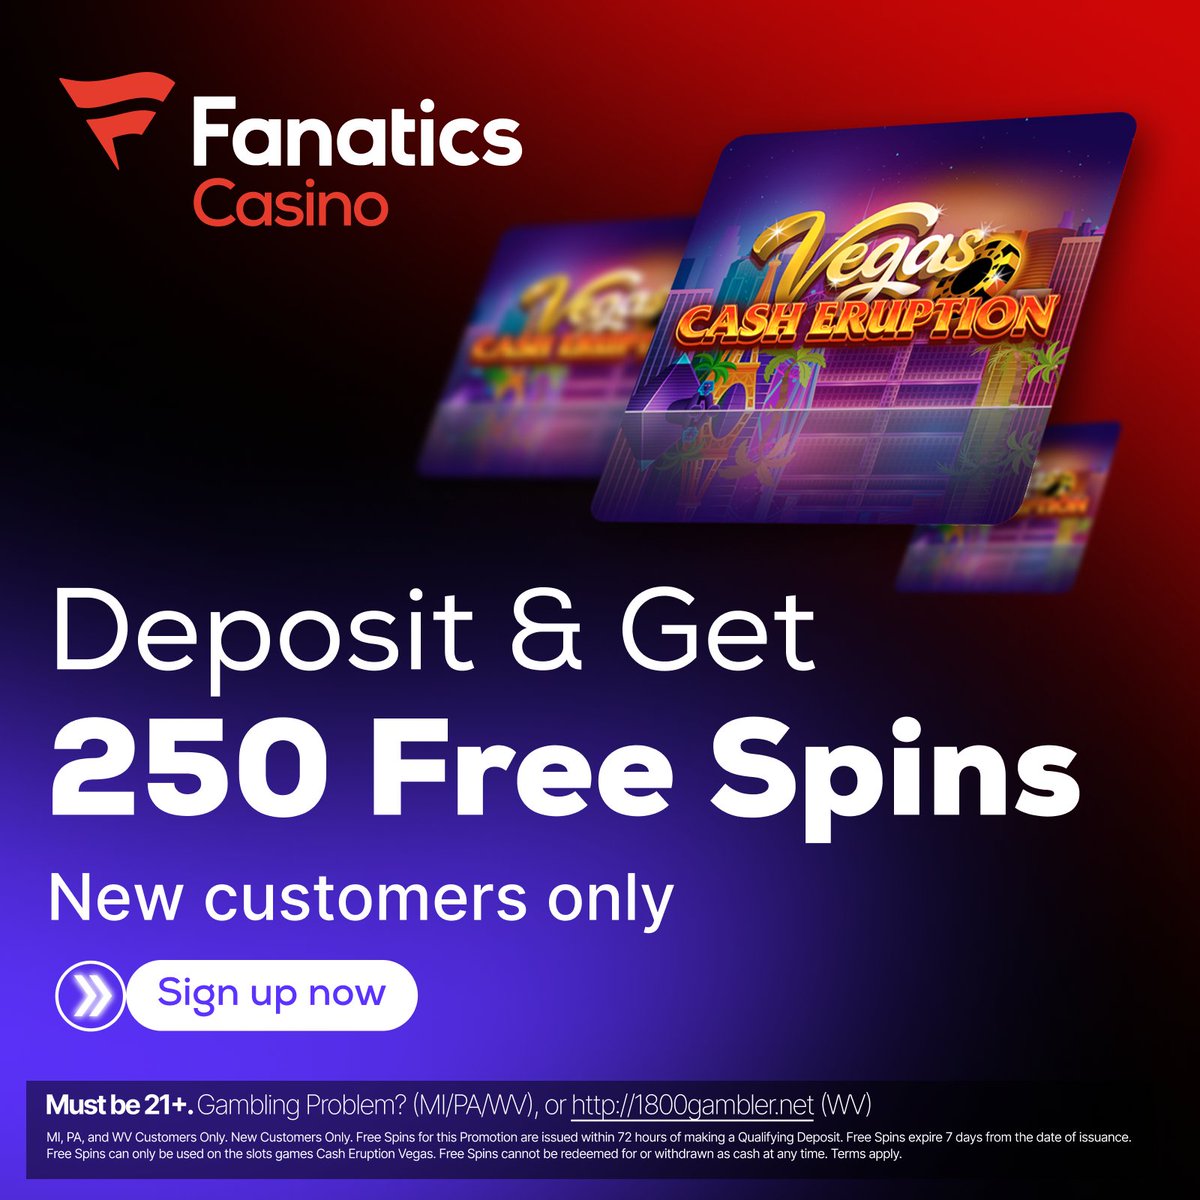 📣 ATTENTION NEW JERSEY 📣 Fanatics launched in your state this week & they have a HUGE promo for new users. - CLAIM HERE: flashpicks.bet/Fanatics250-Fi… - Deposit at least $5 - GET 250 FREE SPINS INSANE PROMO 🔥